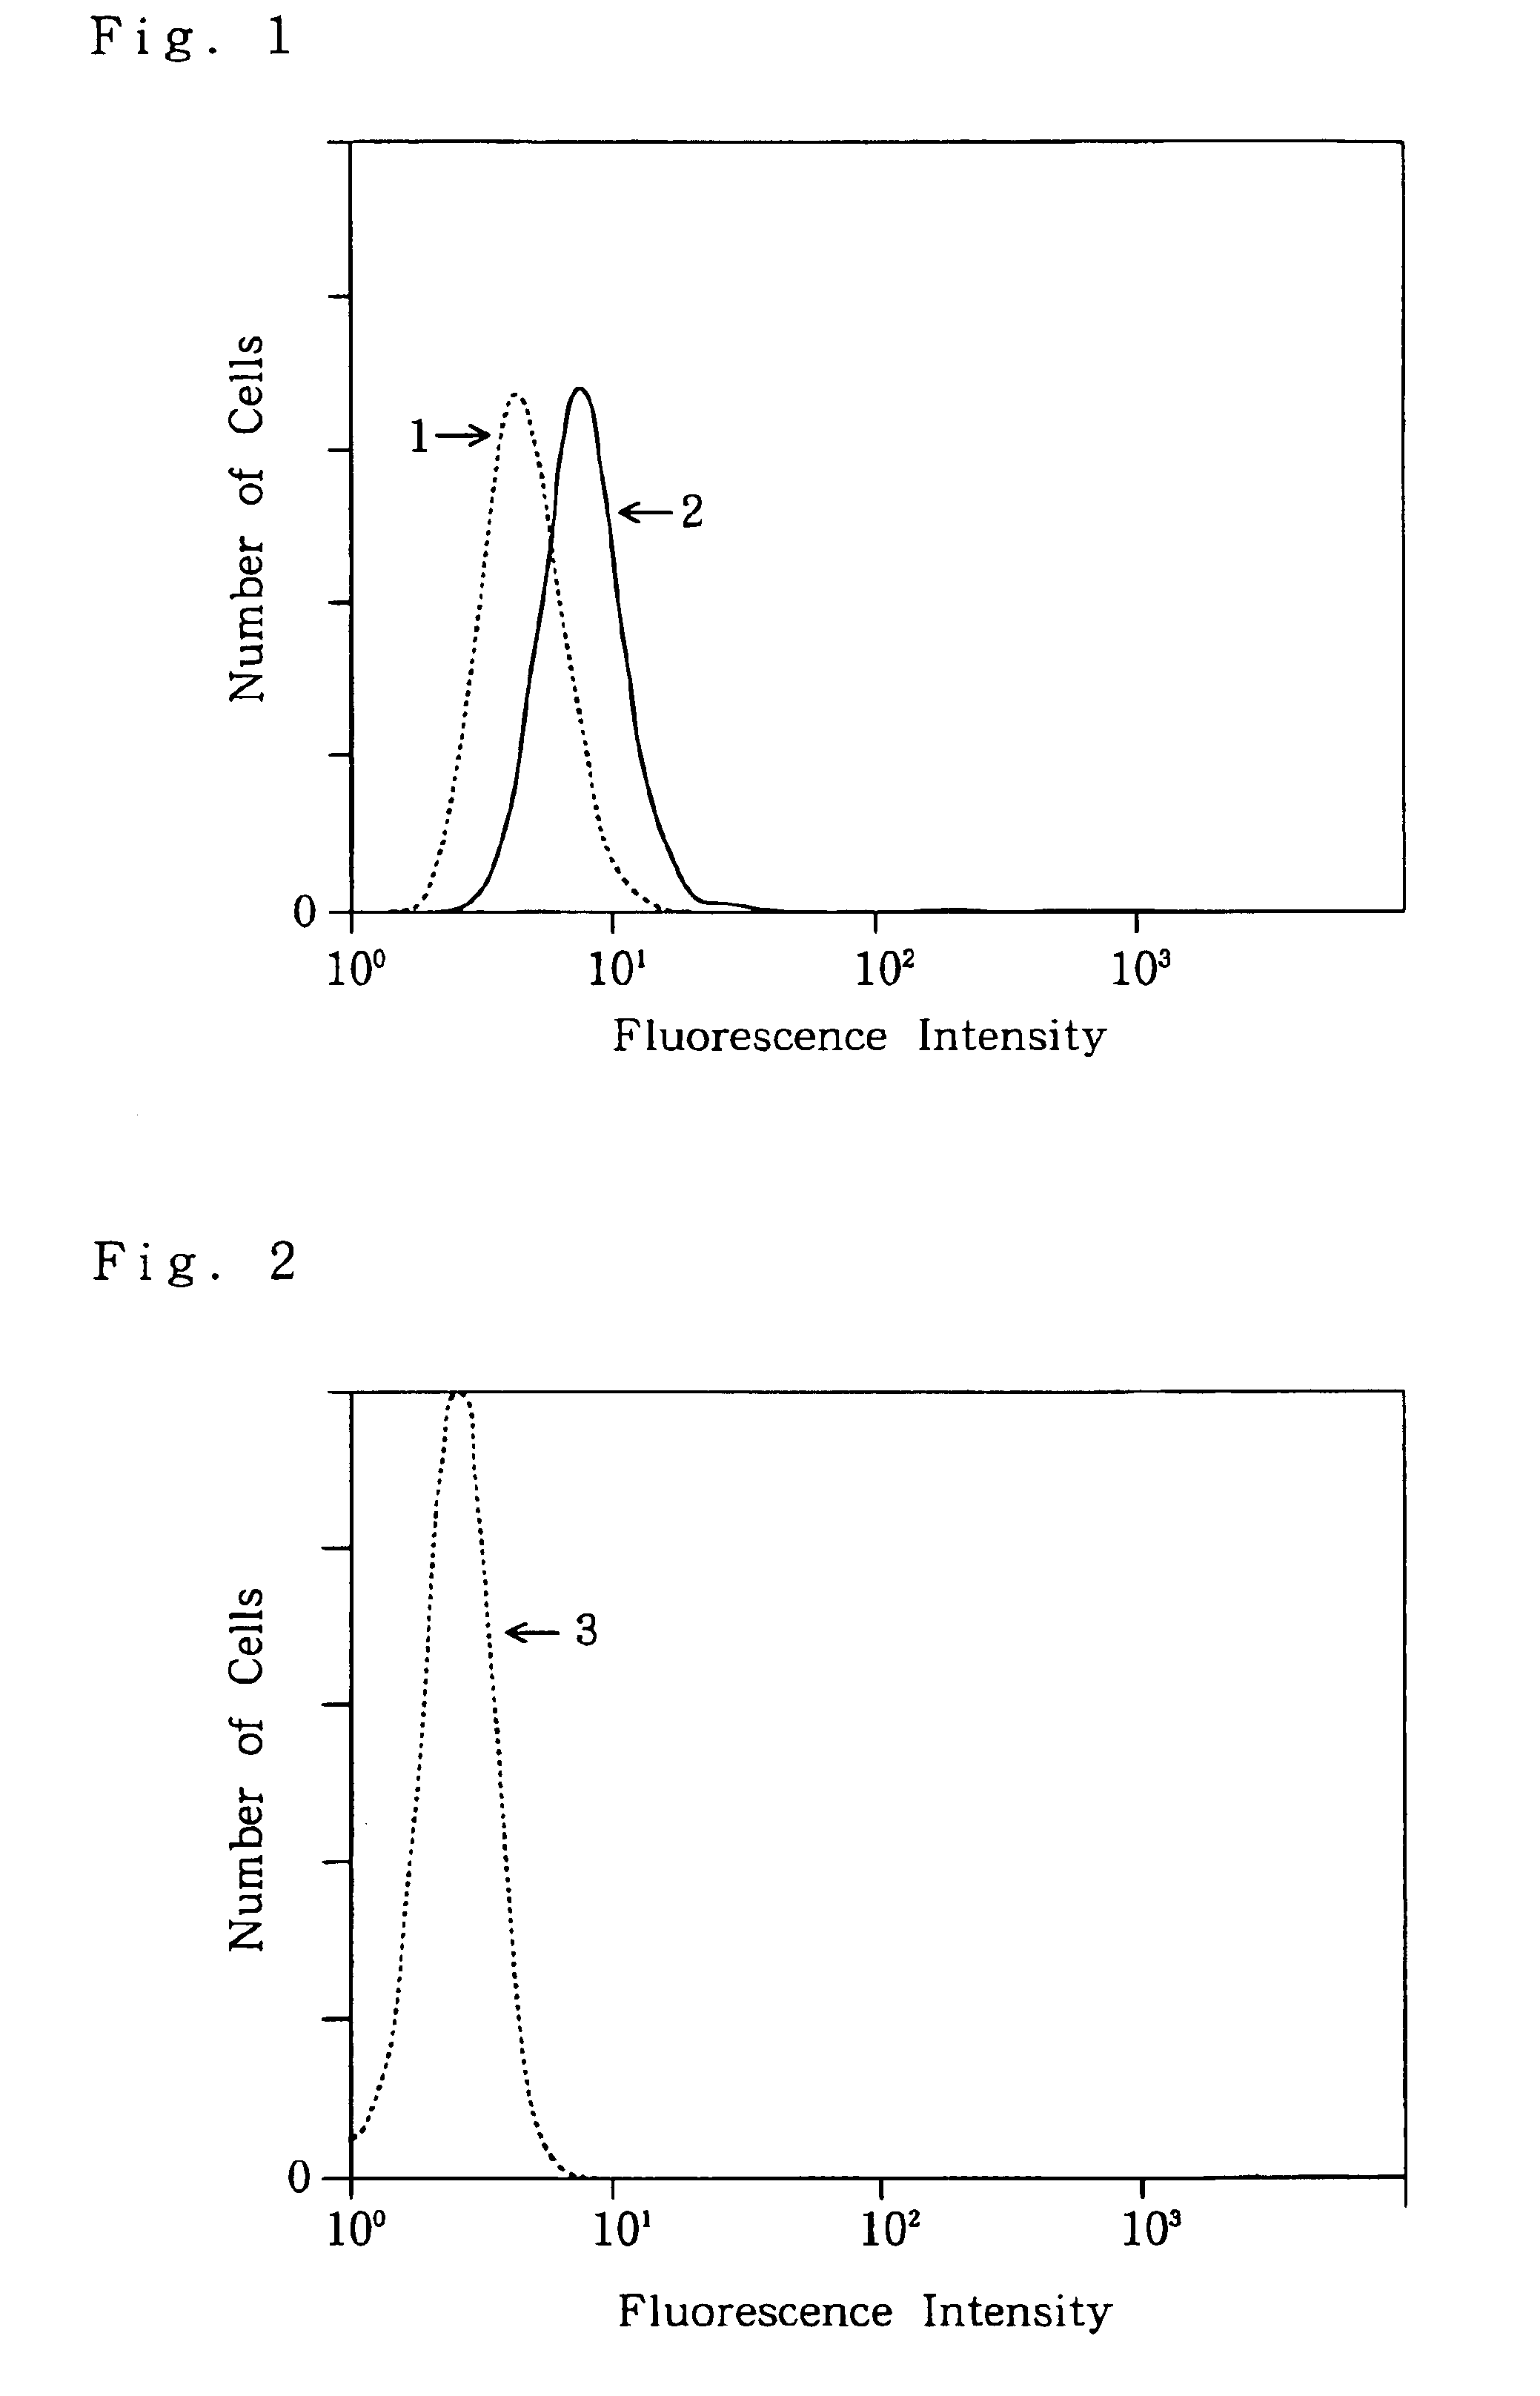 Monoclonal antibody reacting specifically reacting with Fas ligand and production process thereof